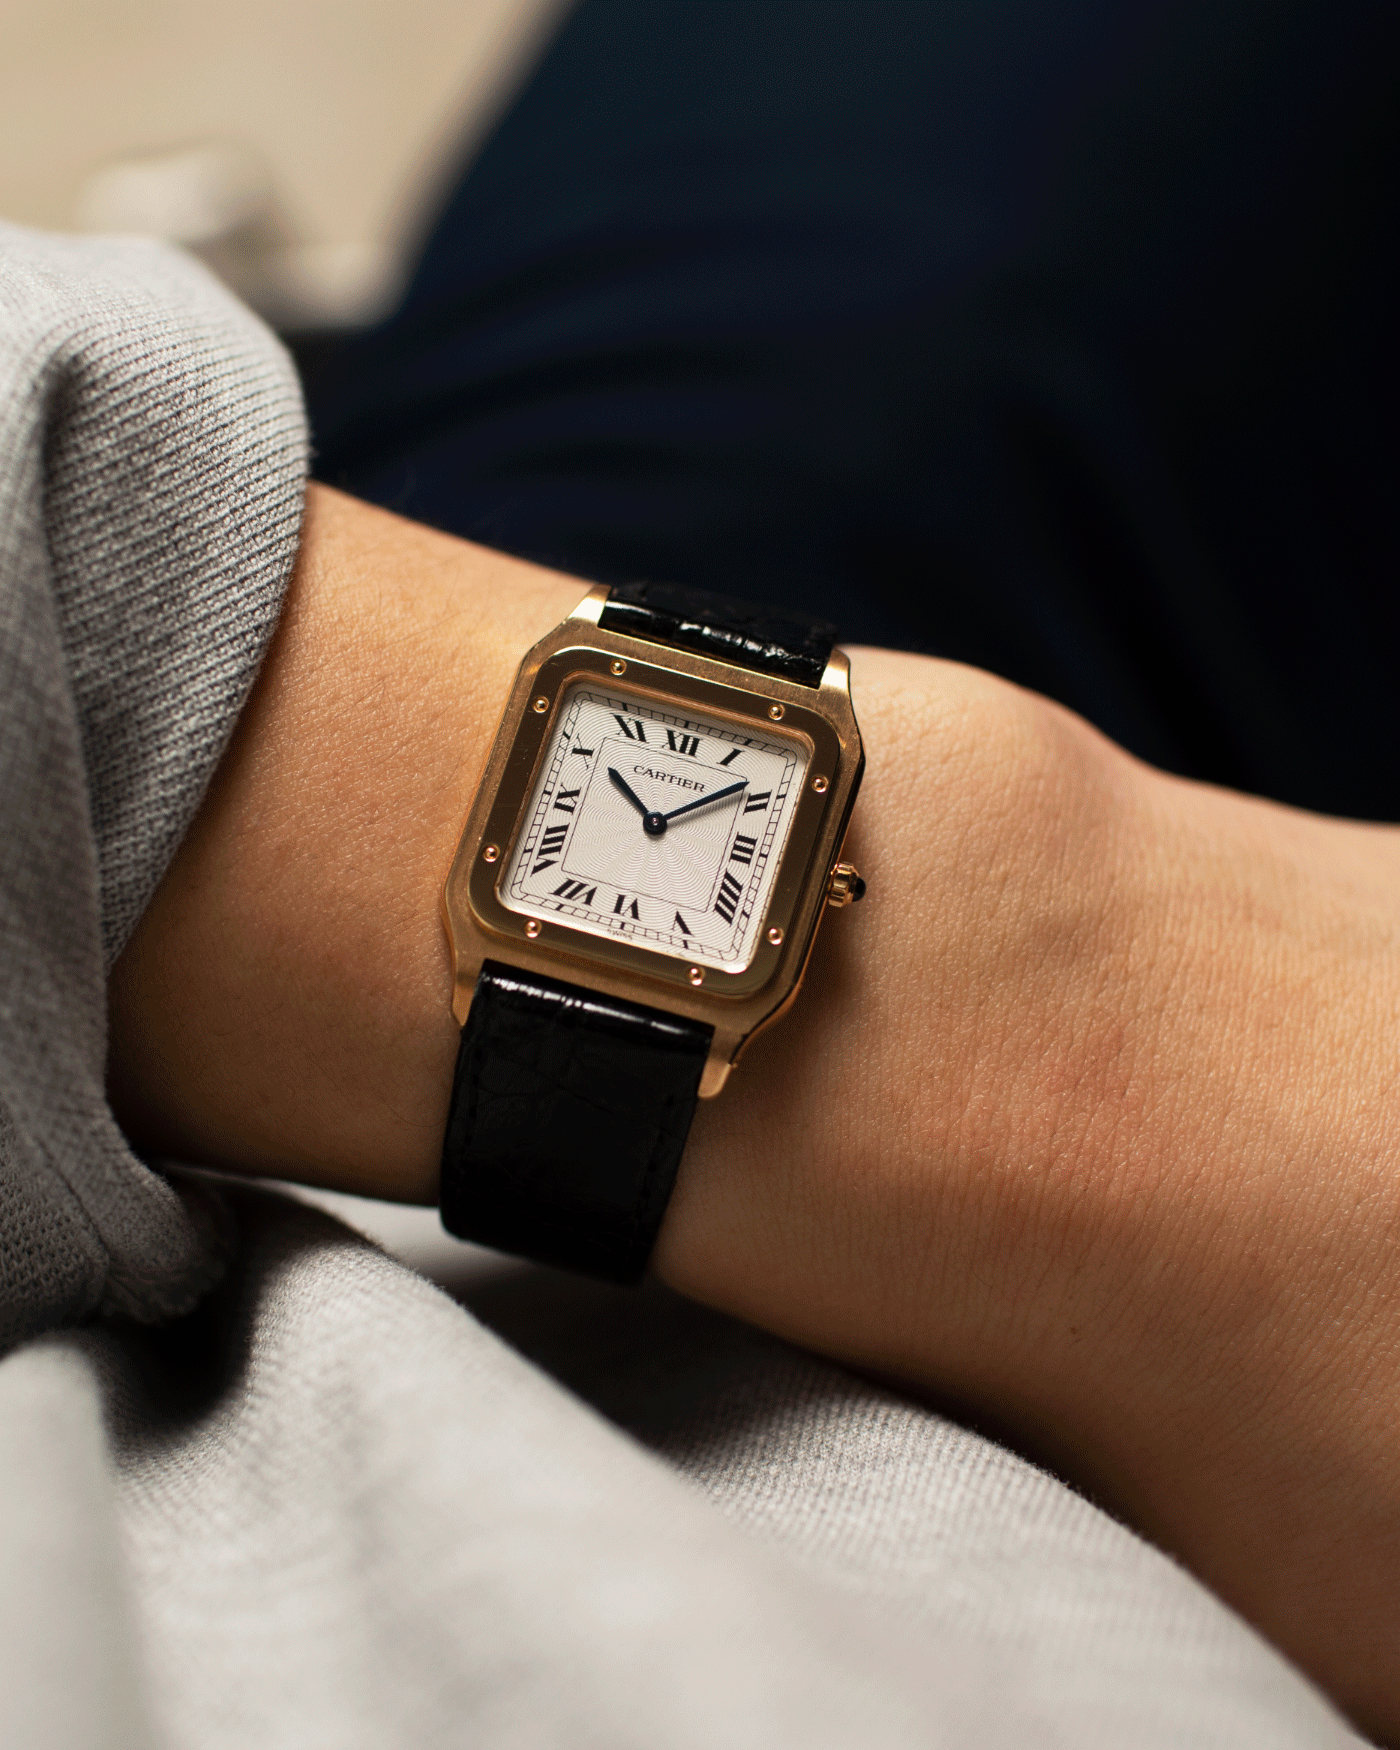 Brand: Cartier Year: 1990s Model: Santos Dumont Reference: 1576 Material: 18k Yellow Gold Movement: F.Piguet 21 Case Diameter: 27mm Strap: Black Leather Strap with Cartier 18k Yellow Gold Tang Buckle